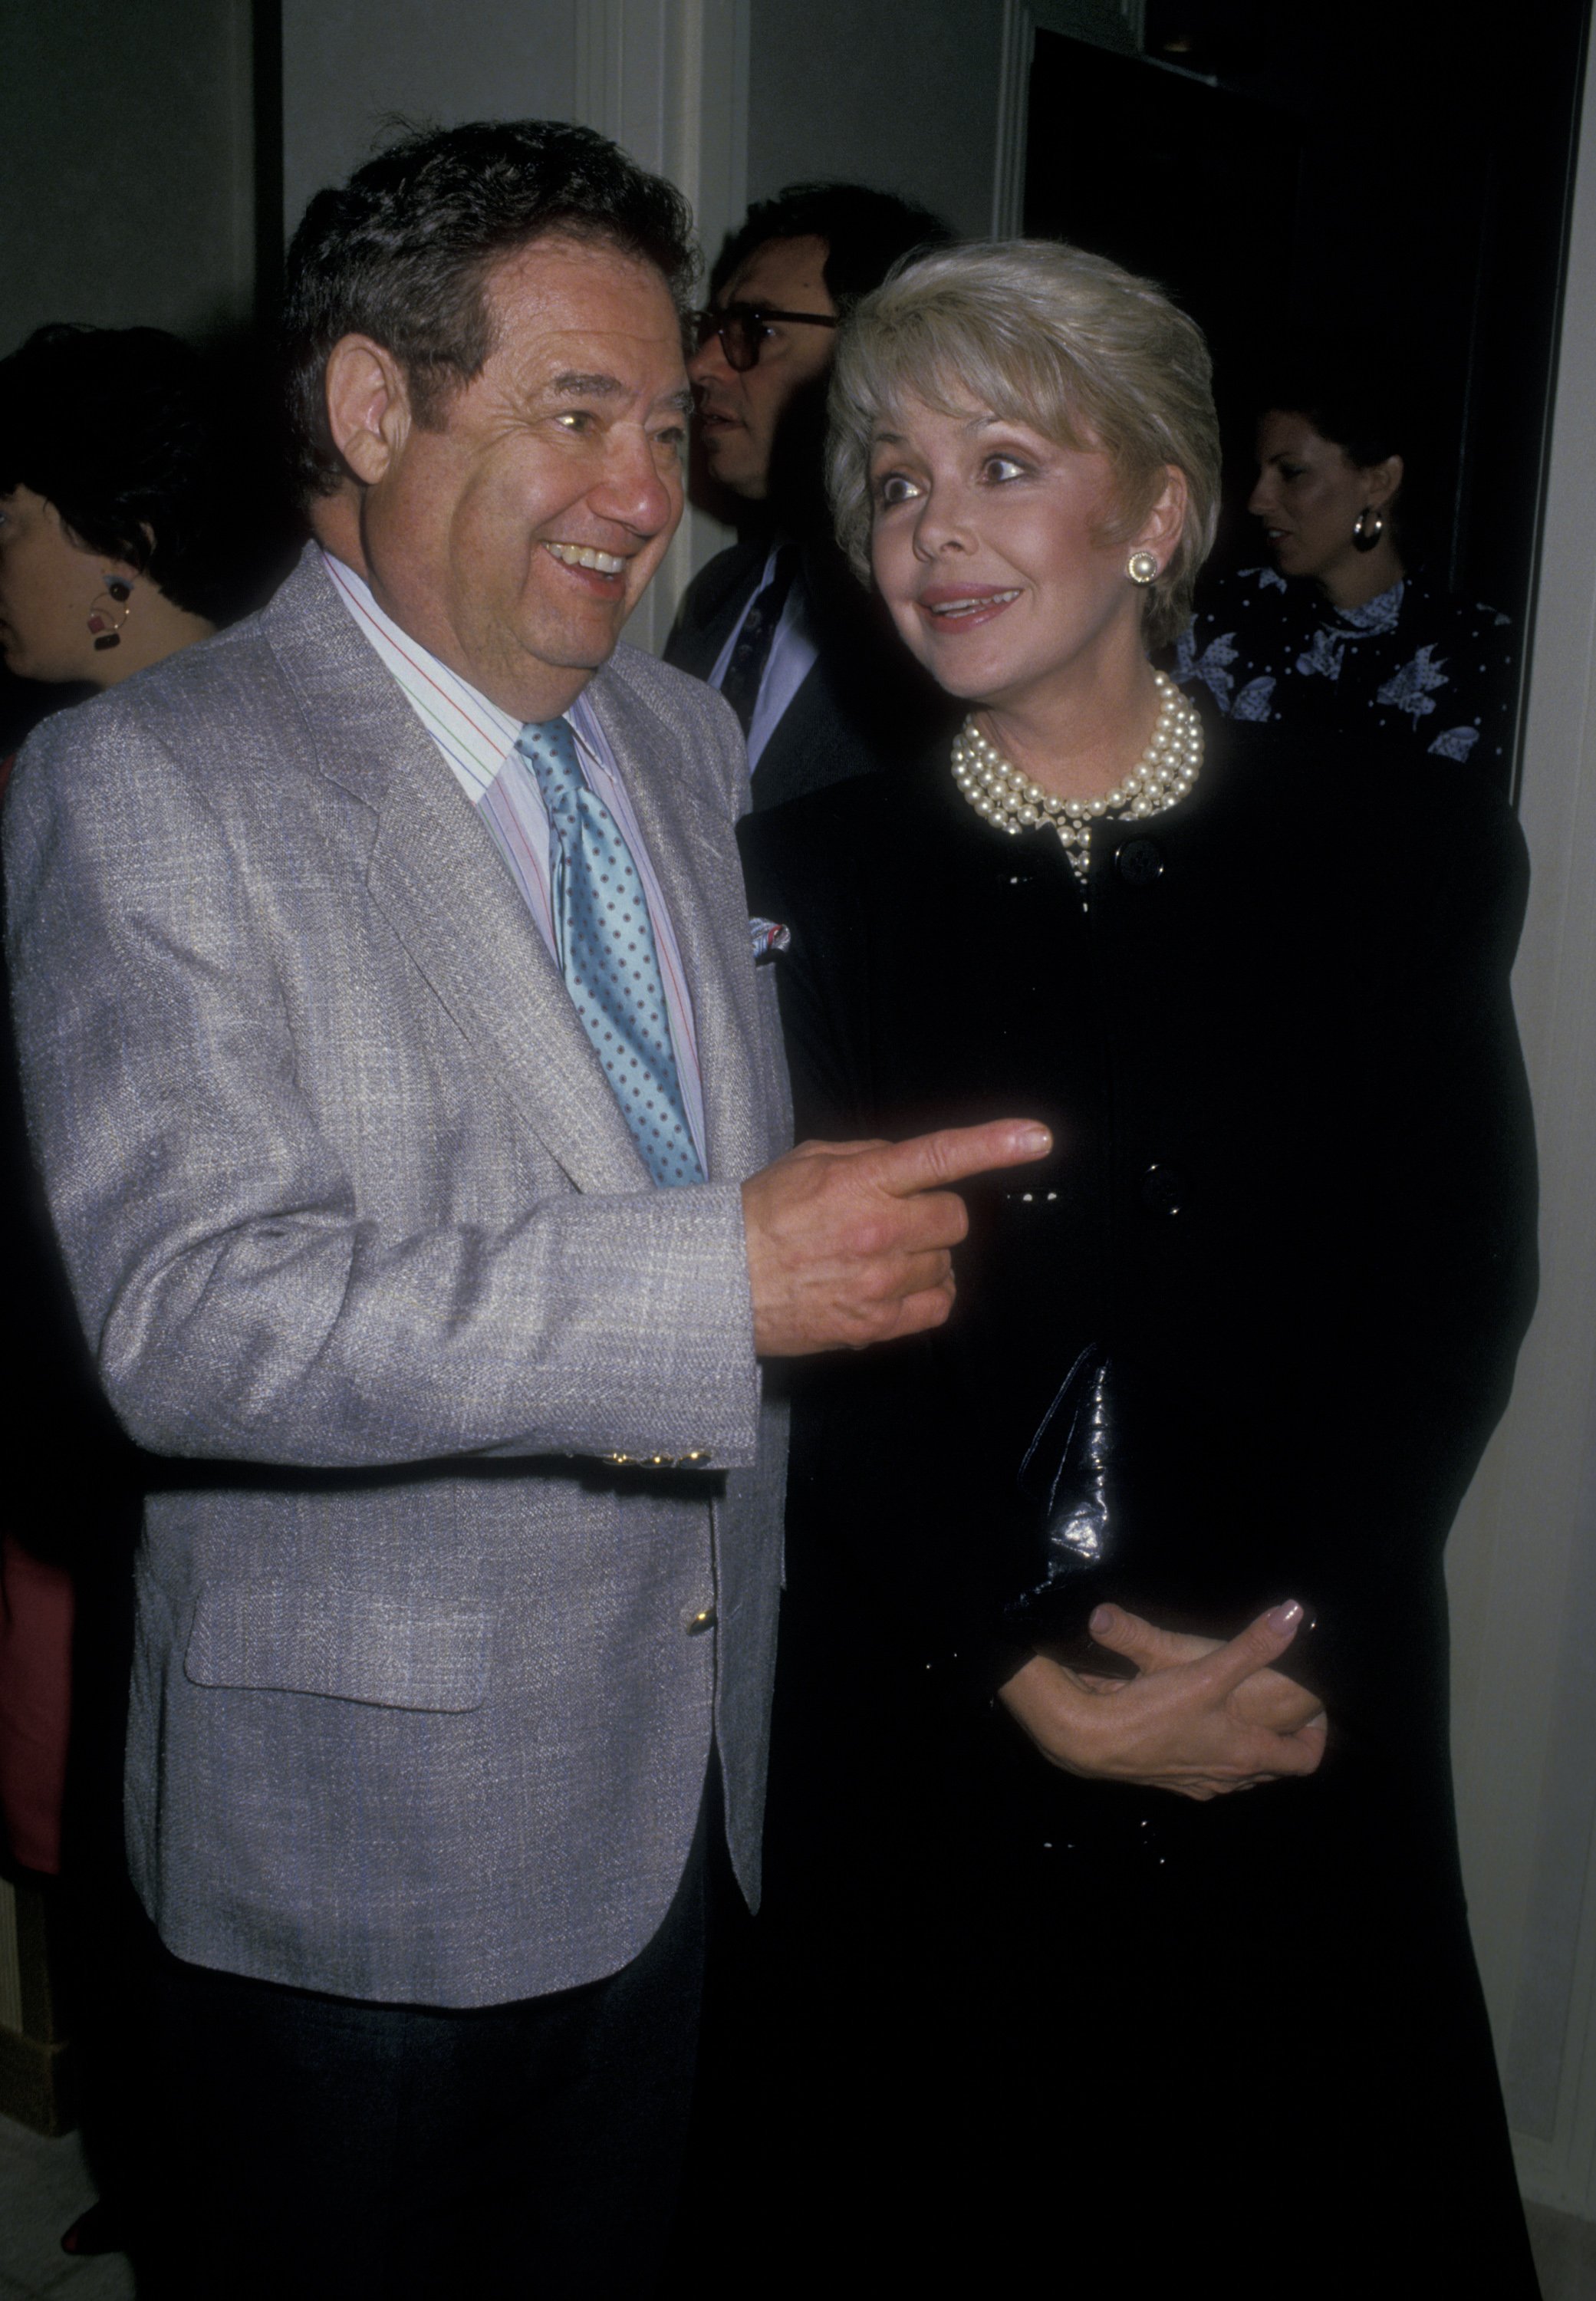 Warren Cowan and Barbara Rush at the opening party for "Sleuth" on July 6, 1988, at St. James Club in Beverly Hills, California | Photo: Getty Images/Ron Galella, Ltd/Ron Galella Collection